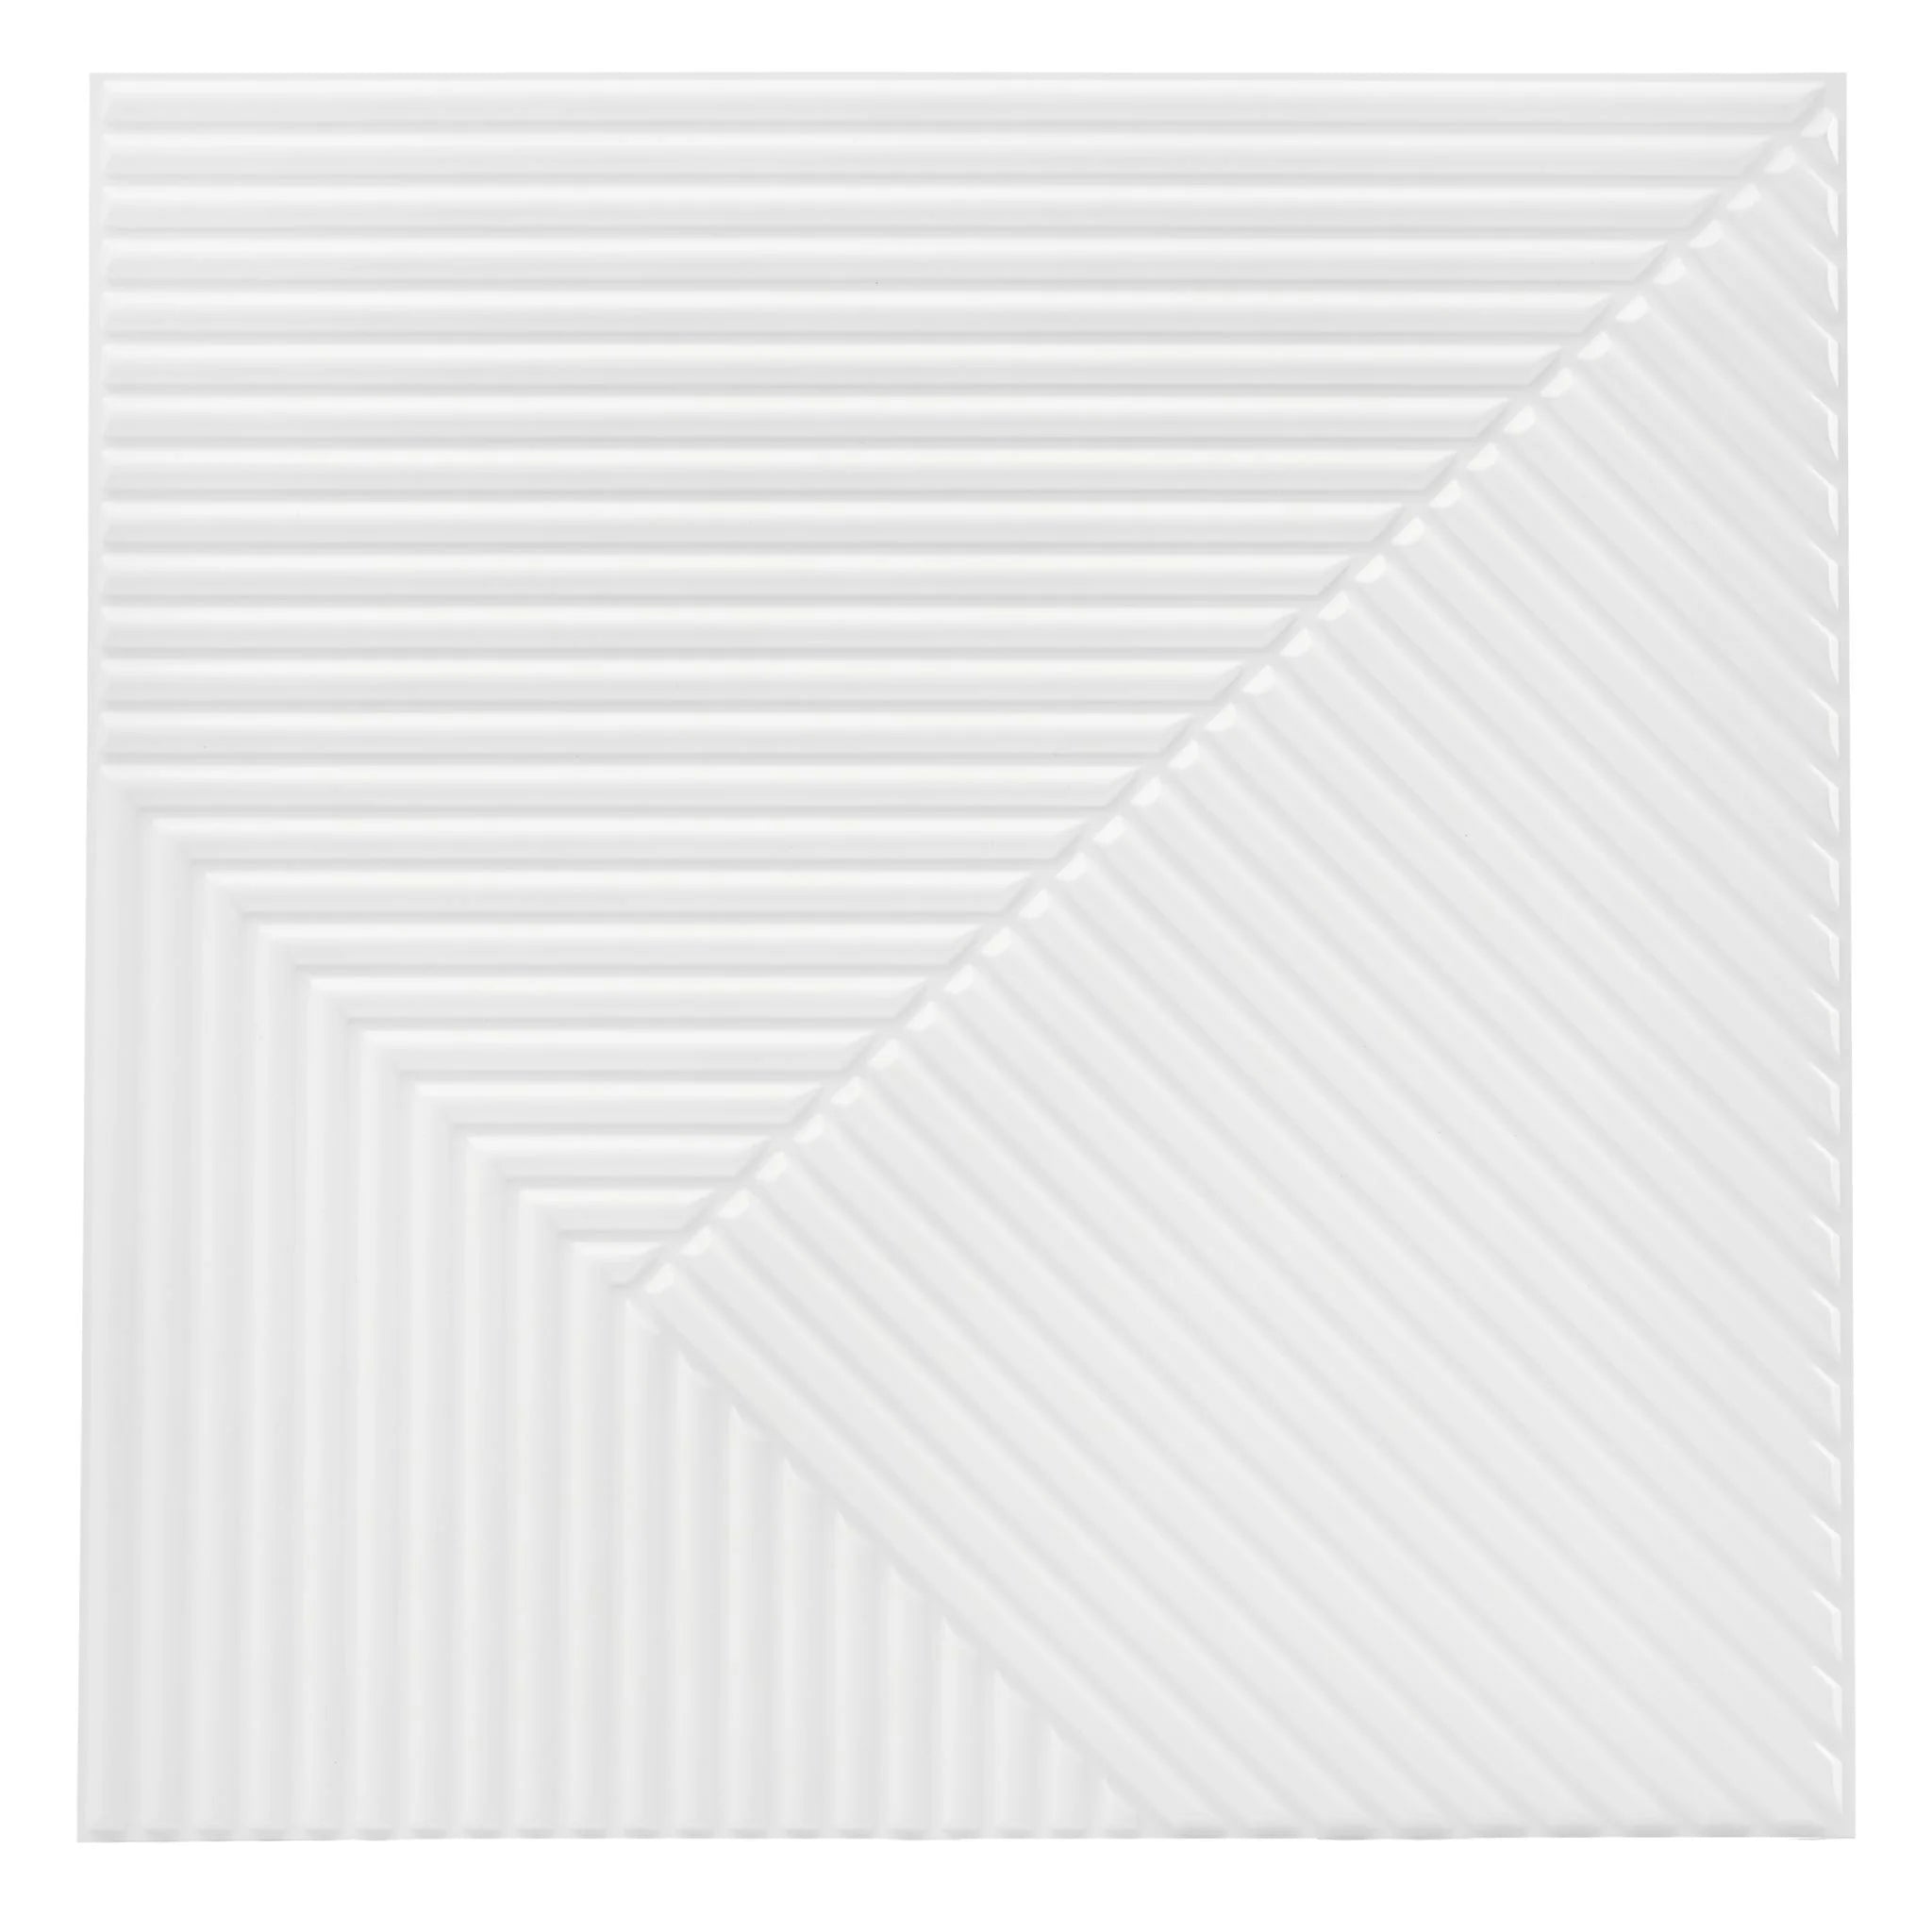 White PVC wall panel with vertical ribbed design